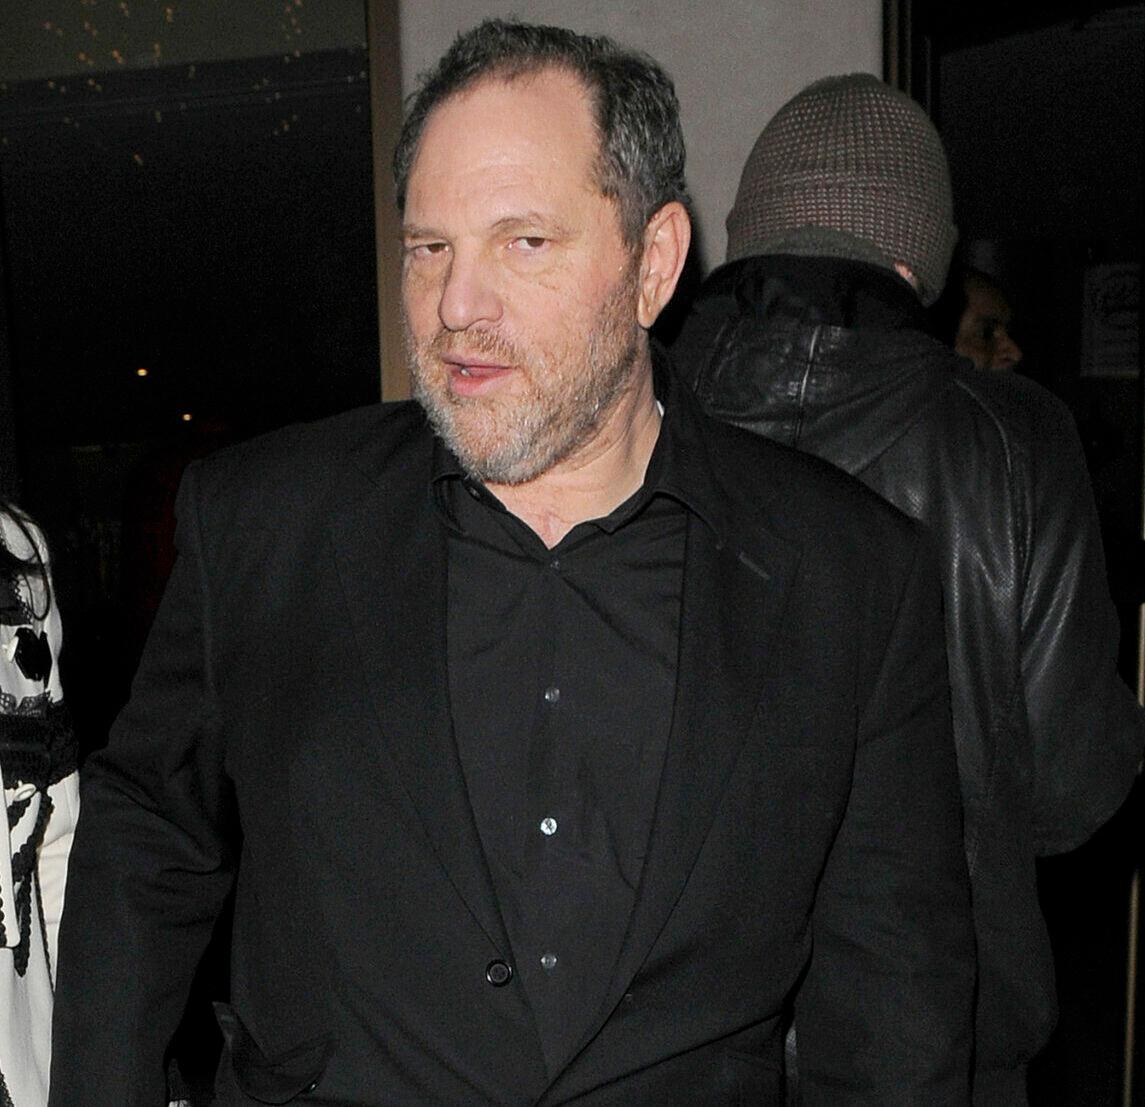 L.A Court Finds Harvey Weinstein Guilty Of Rape And Multiple Sex-Related Charges